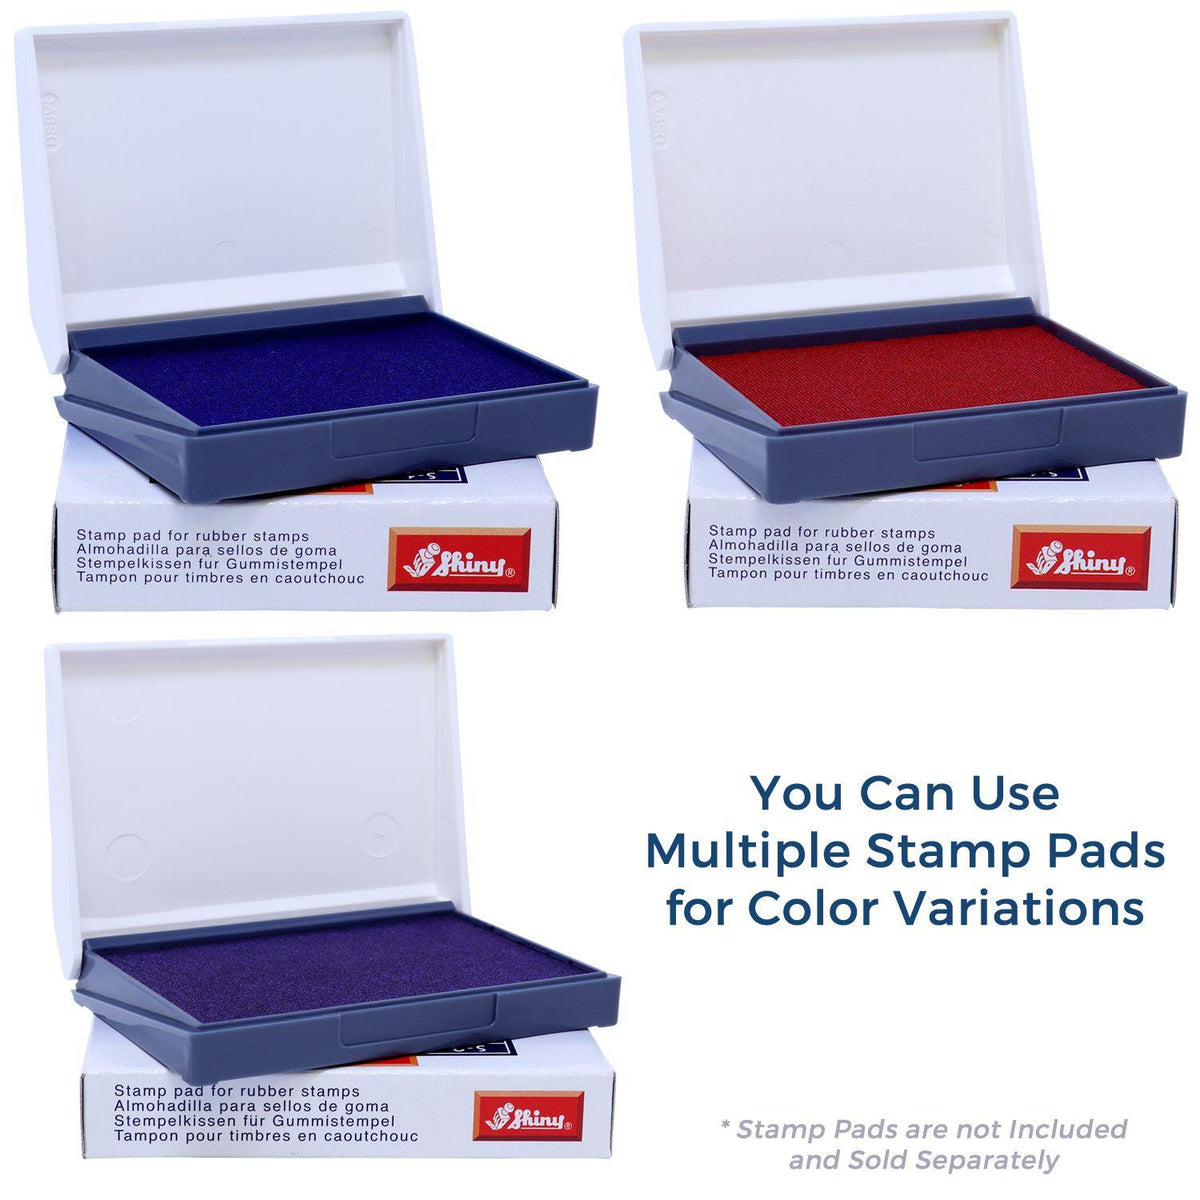 Stamp Pads for Large Plaintiff Rubber Stamp Available